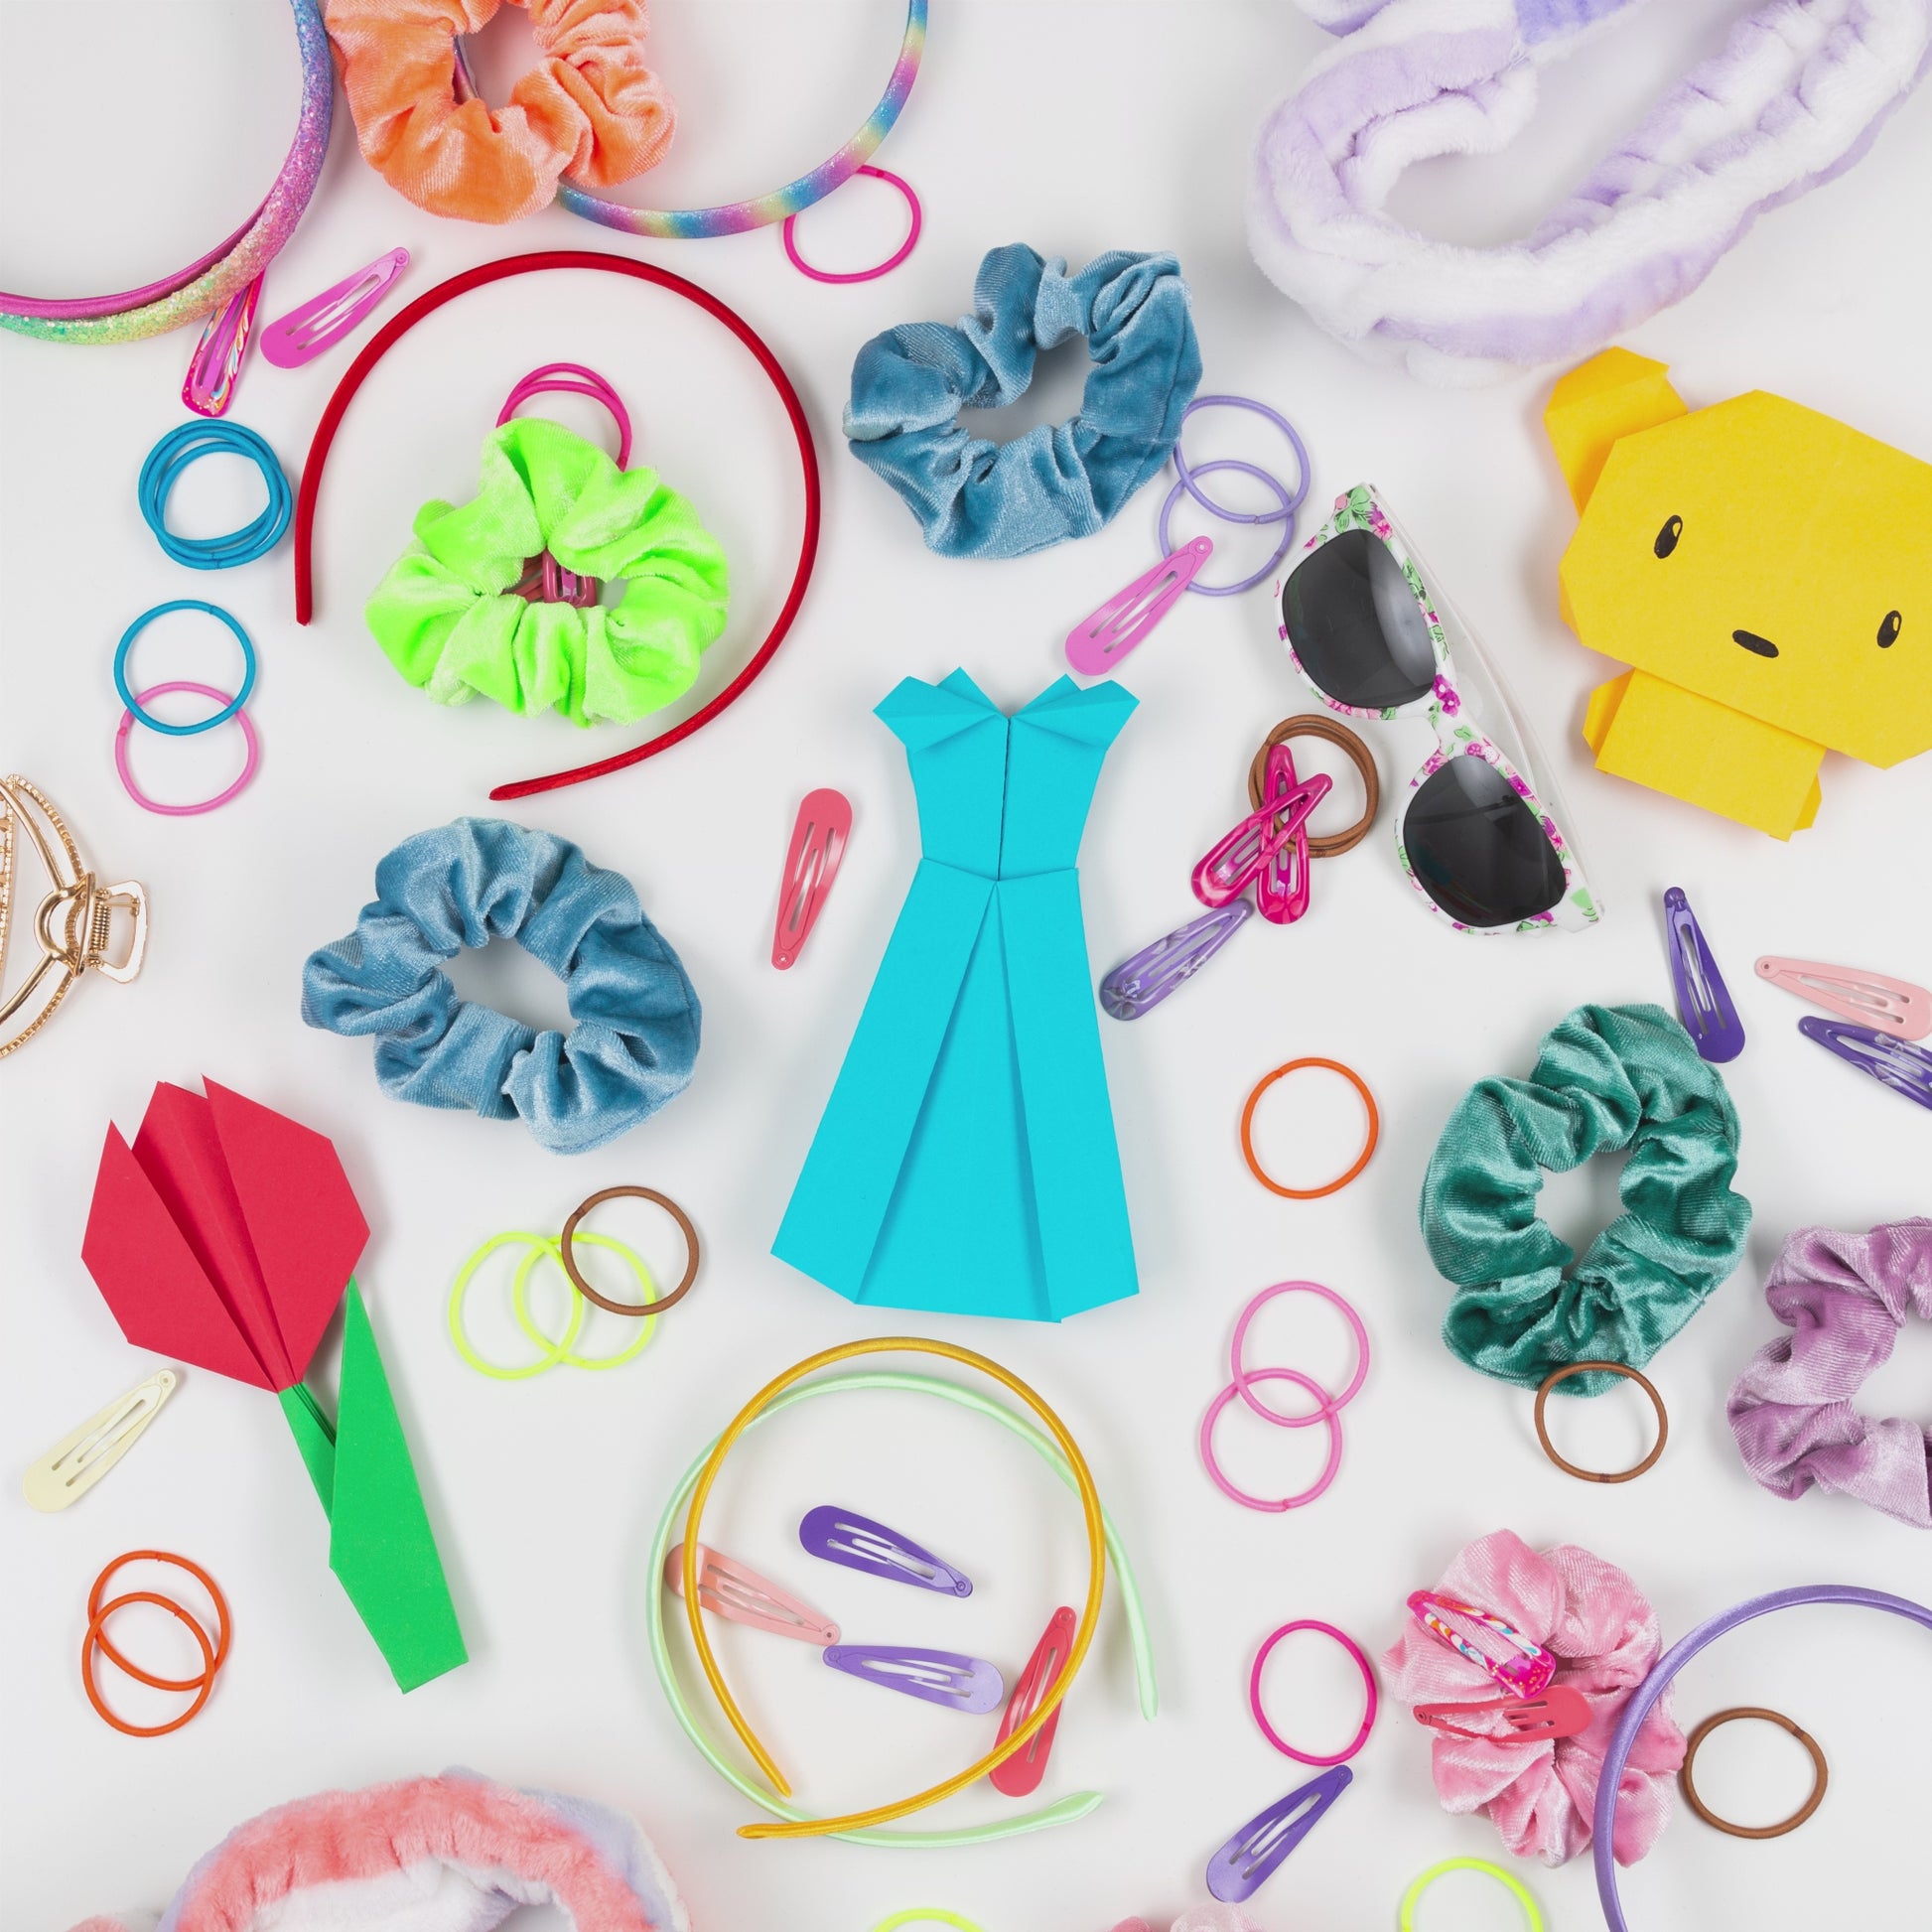 This stop motion image shows lots of hair accessories against a white background. The accessories wiggle out of the frame as the mint green hair accessory storage box enters. A finger presses on it and it turns to pink. It then opens and it is empty. With the wave of a hand it is filled with beautiful hair accessories. The box then closes and wiggles out of the frame